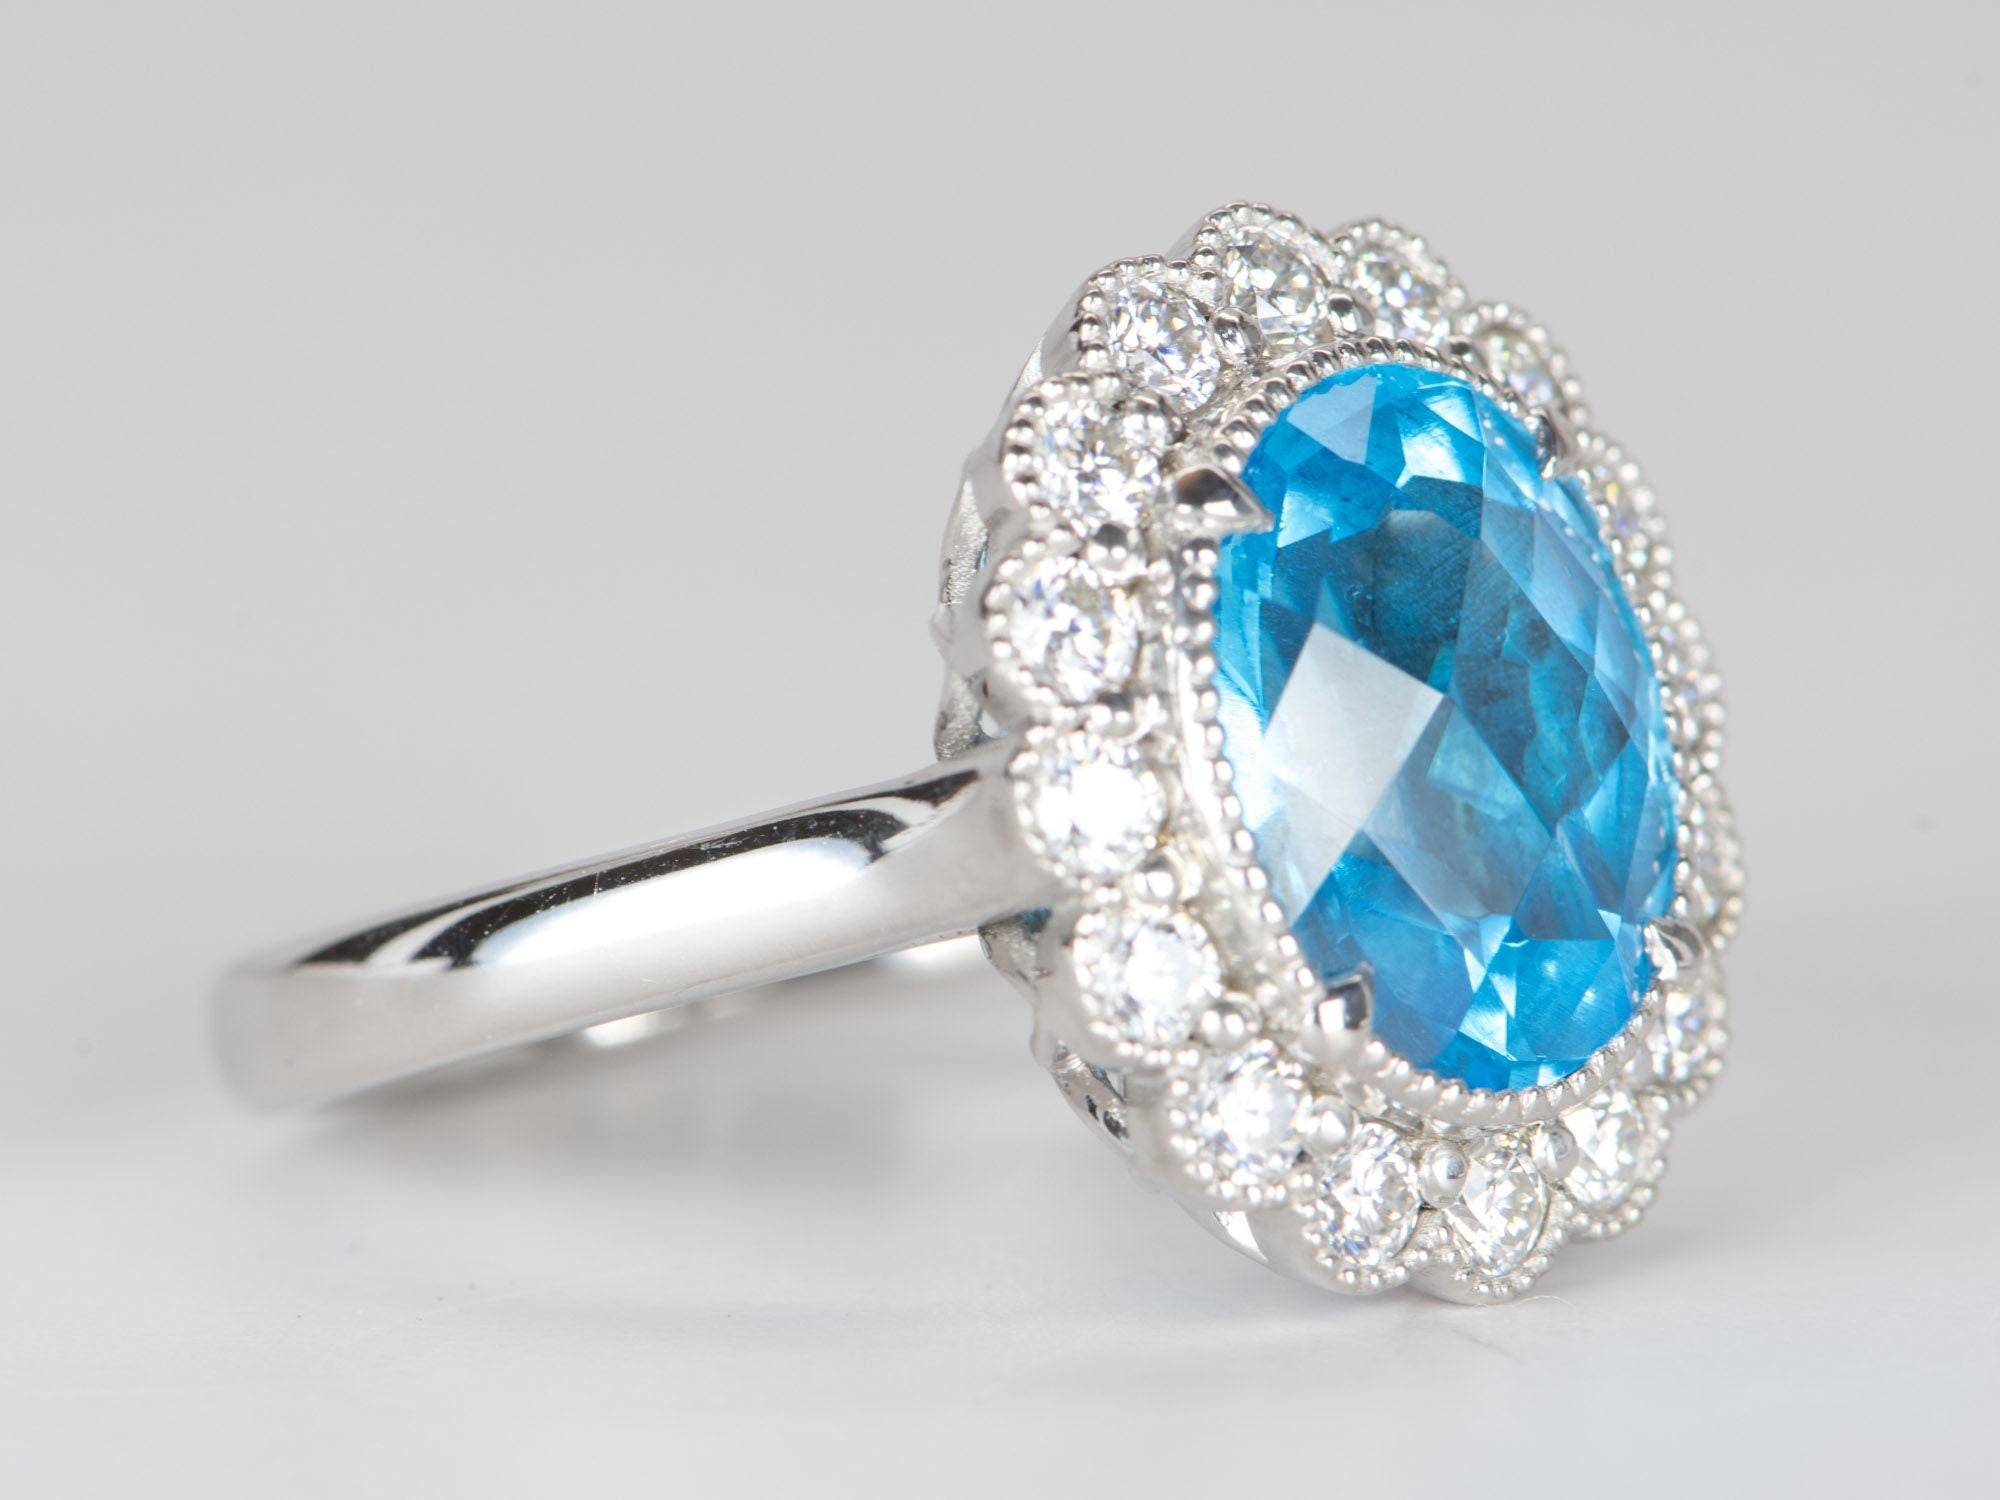 ♥ 5.27ct Swiss Blue Topaz with Moissanite Halo 9K White Gold Statement Ring
♥ Solid 9k white gold ring set with a beautiful oval-shaped topaz
♥ Gorgeous blue color!
♥ The item measures 17.9 mm in length, 15.8 mm in width, and stands 8.2 mm from the